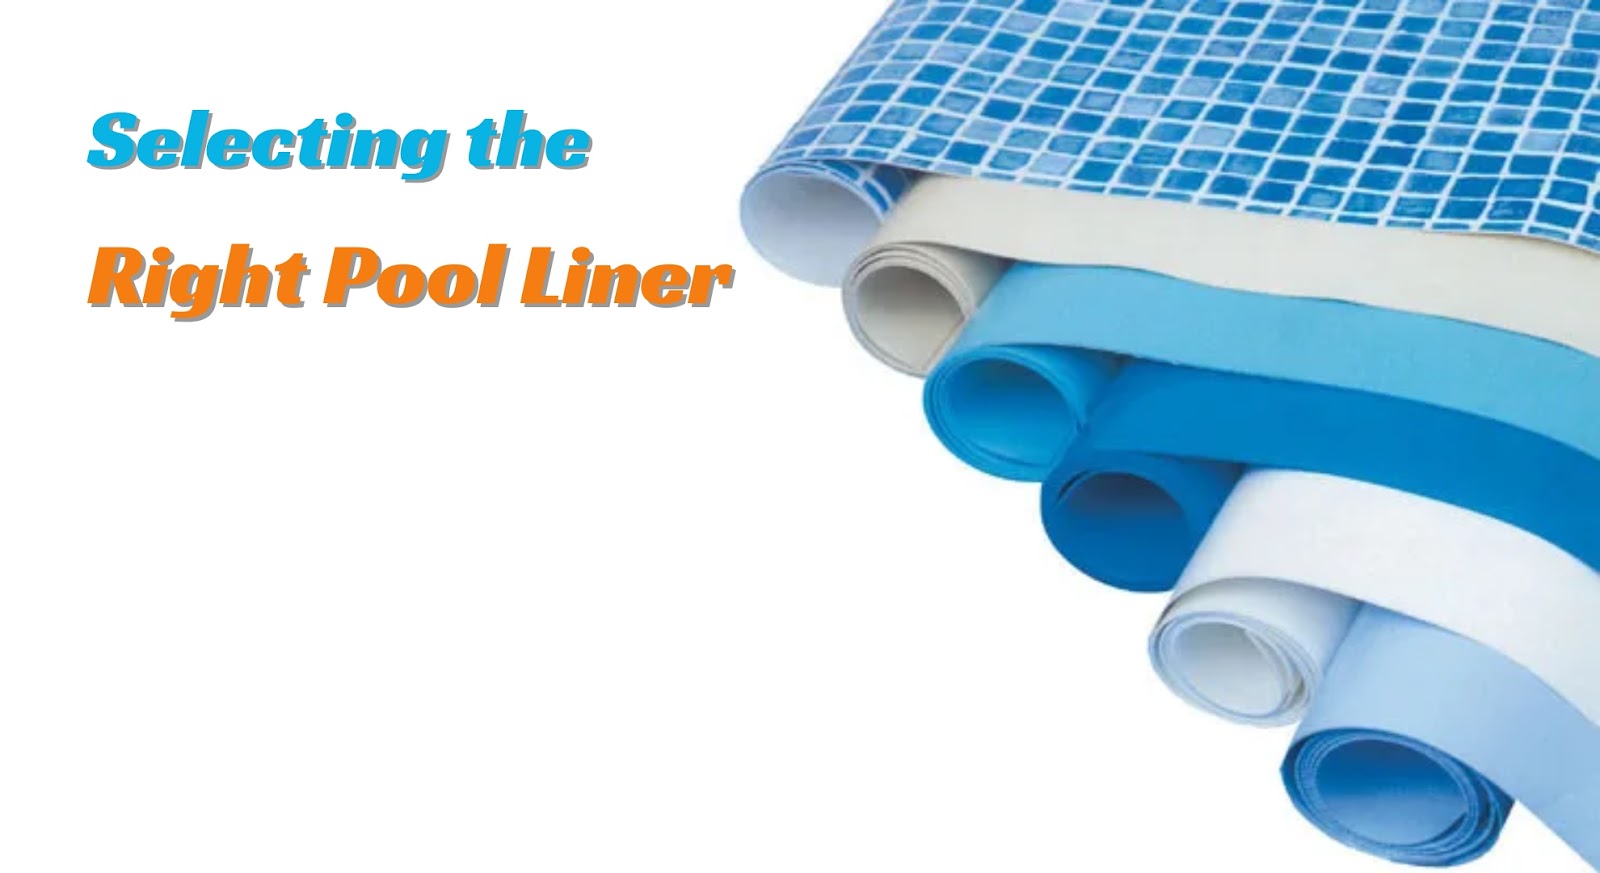 Selecting the Right Pool Liner